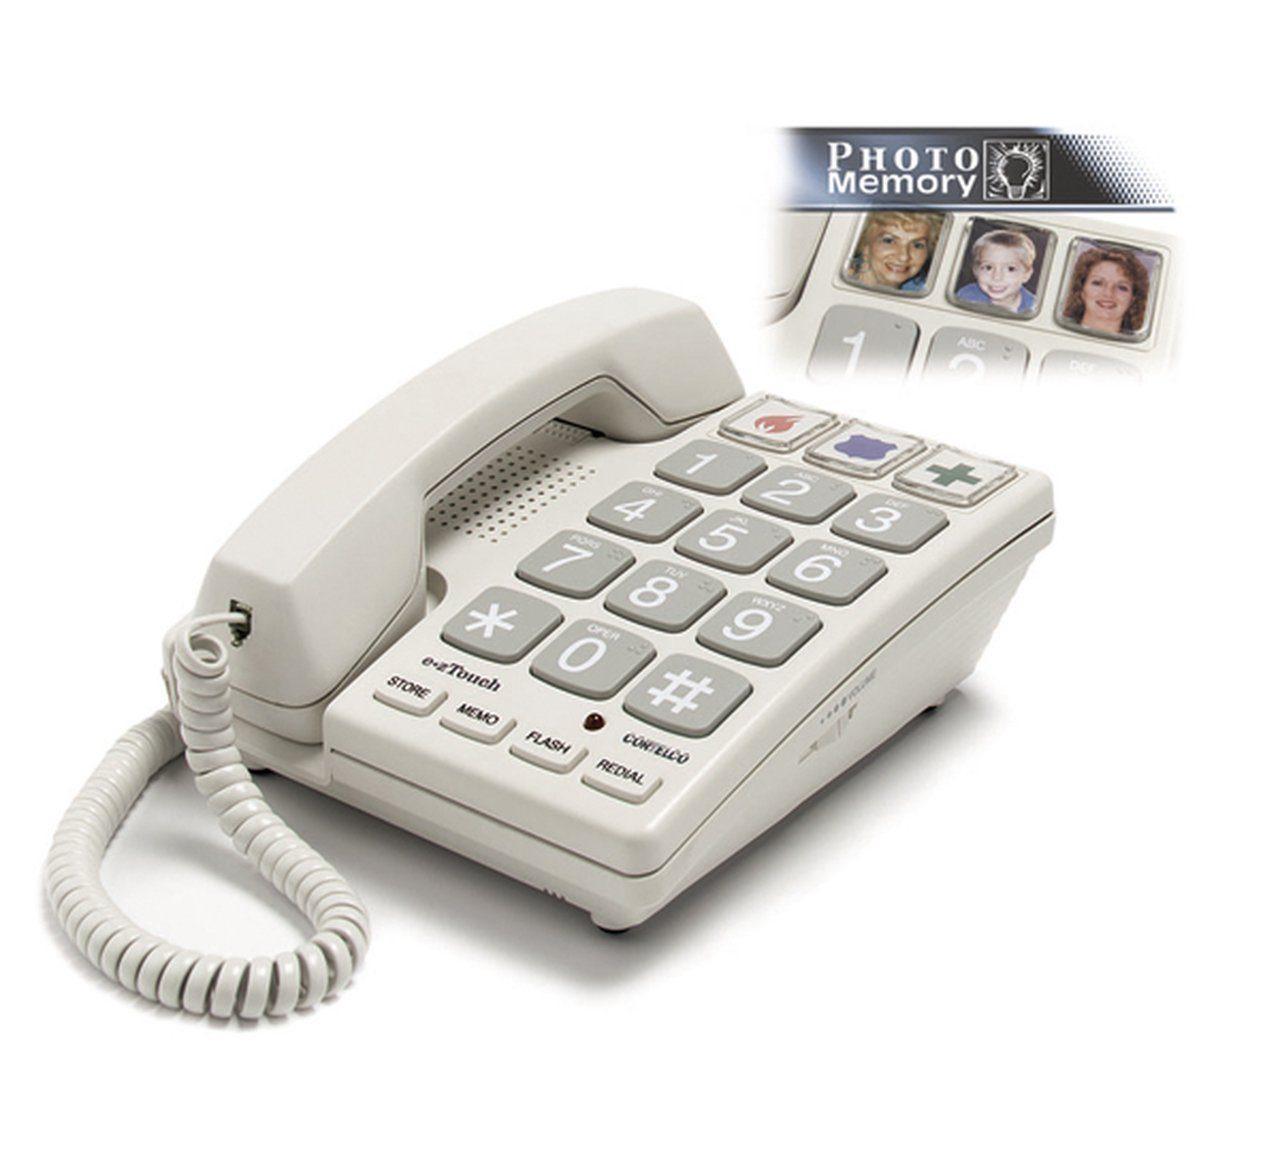 Brailled Number Big Button Corded Telephone: ﻿﻿ - The Low Vision Store